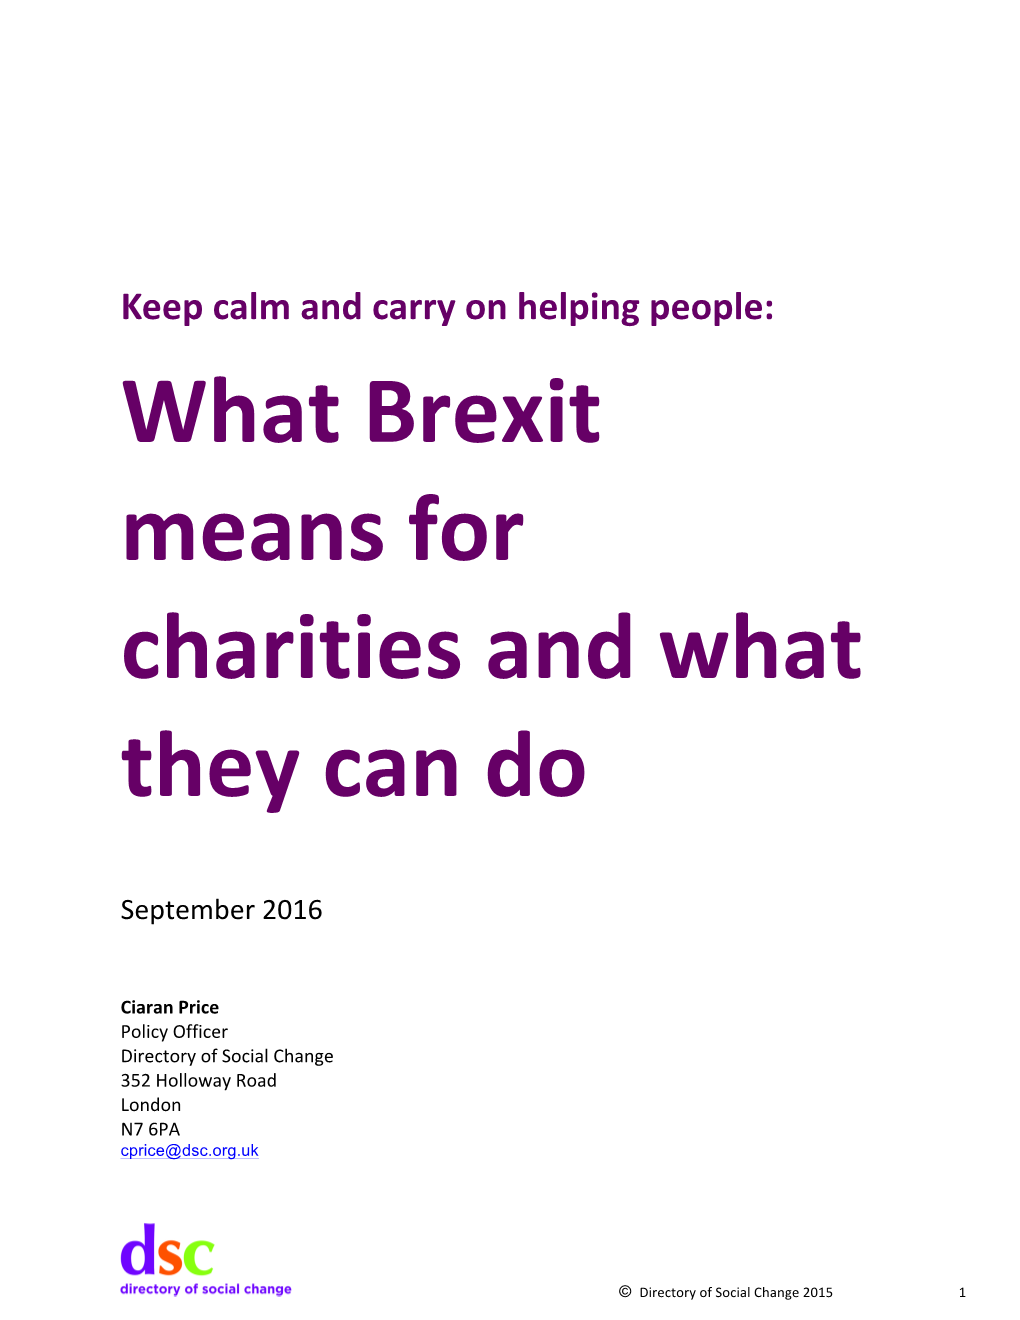 What Brexit Means for Charities and What They Can Do